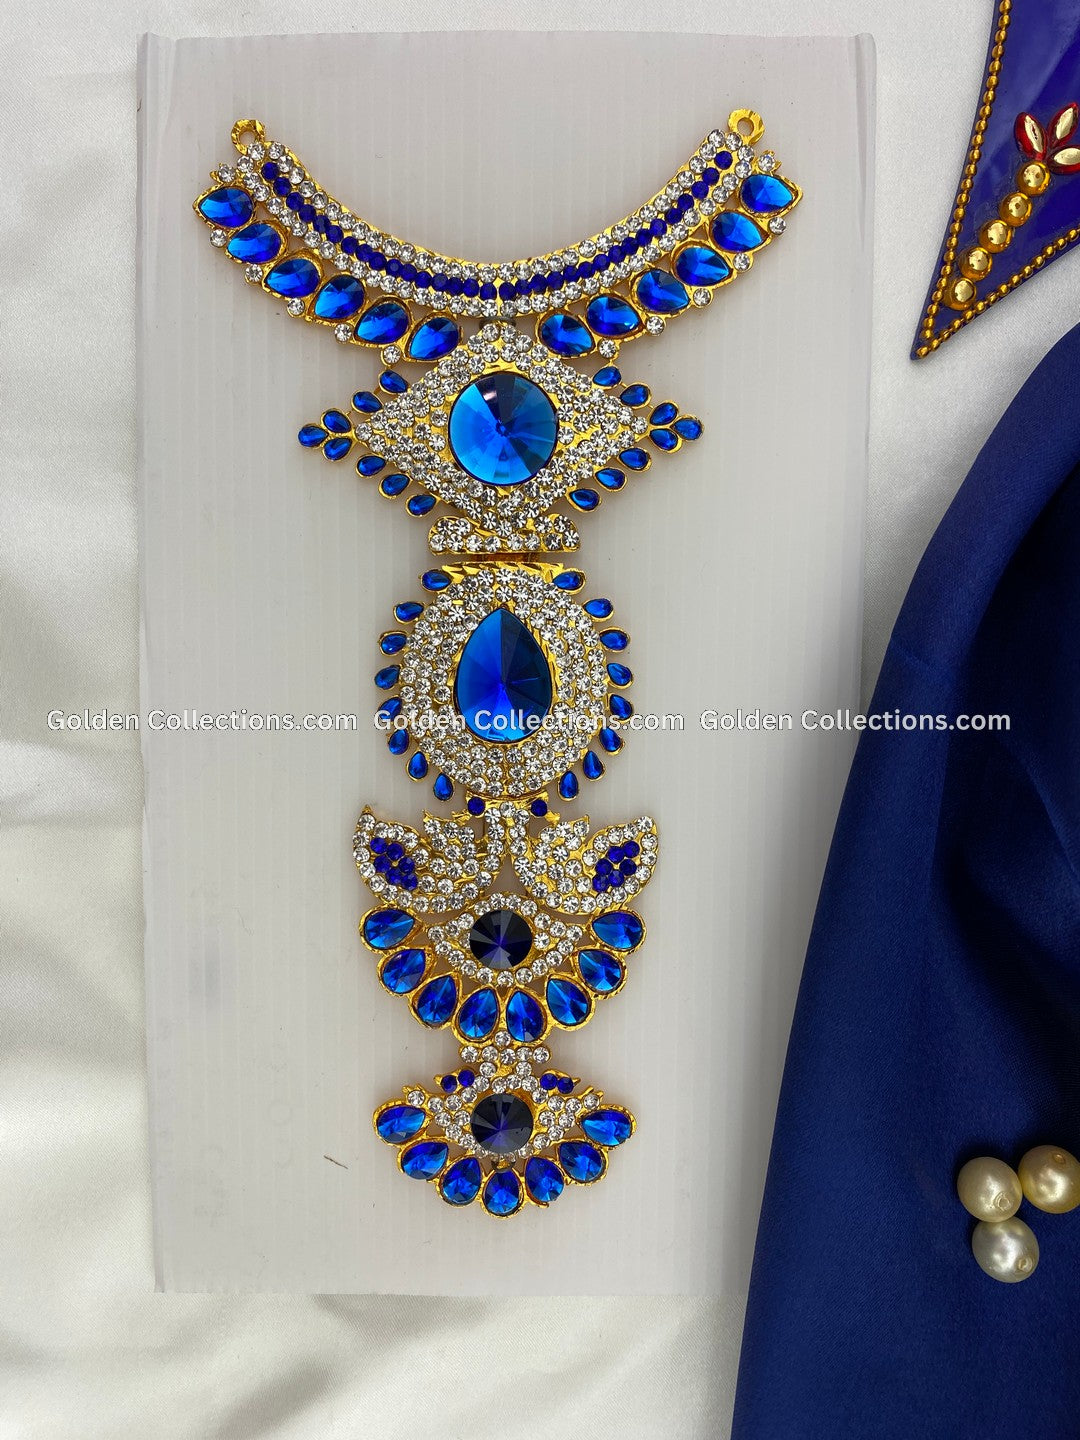 Hindu Deity Jewellery Blue Necklace Golden Collections-1